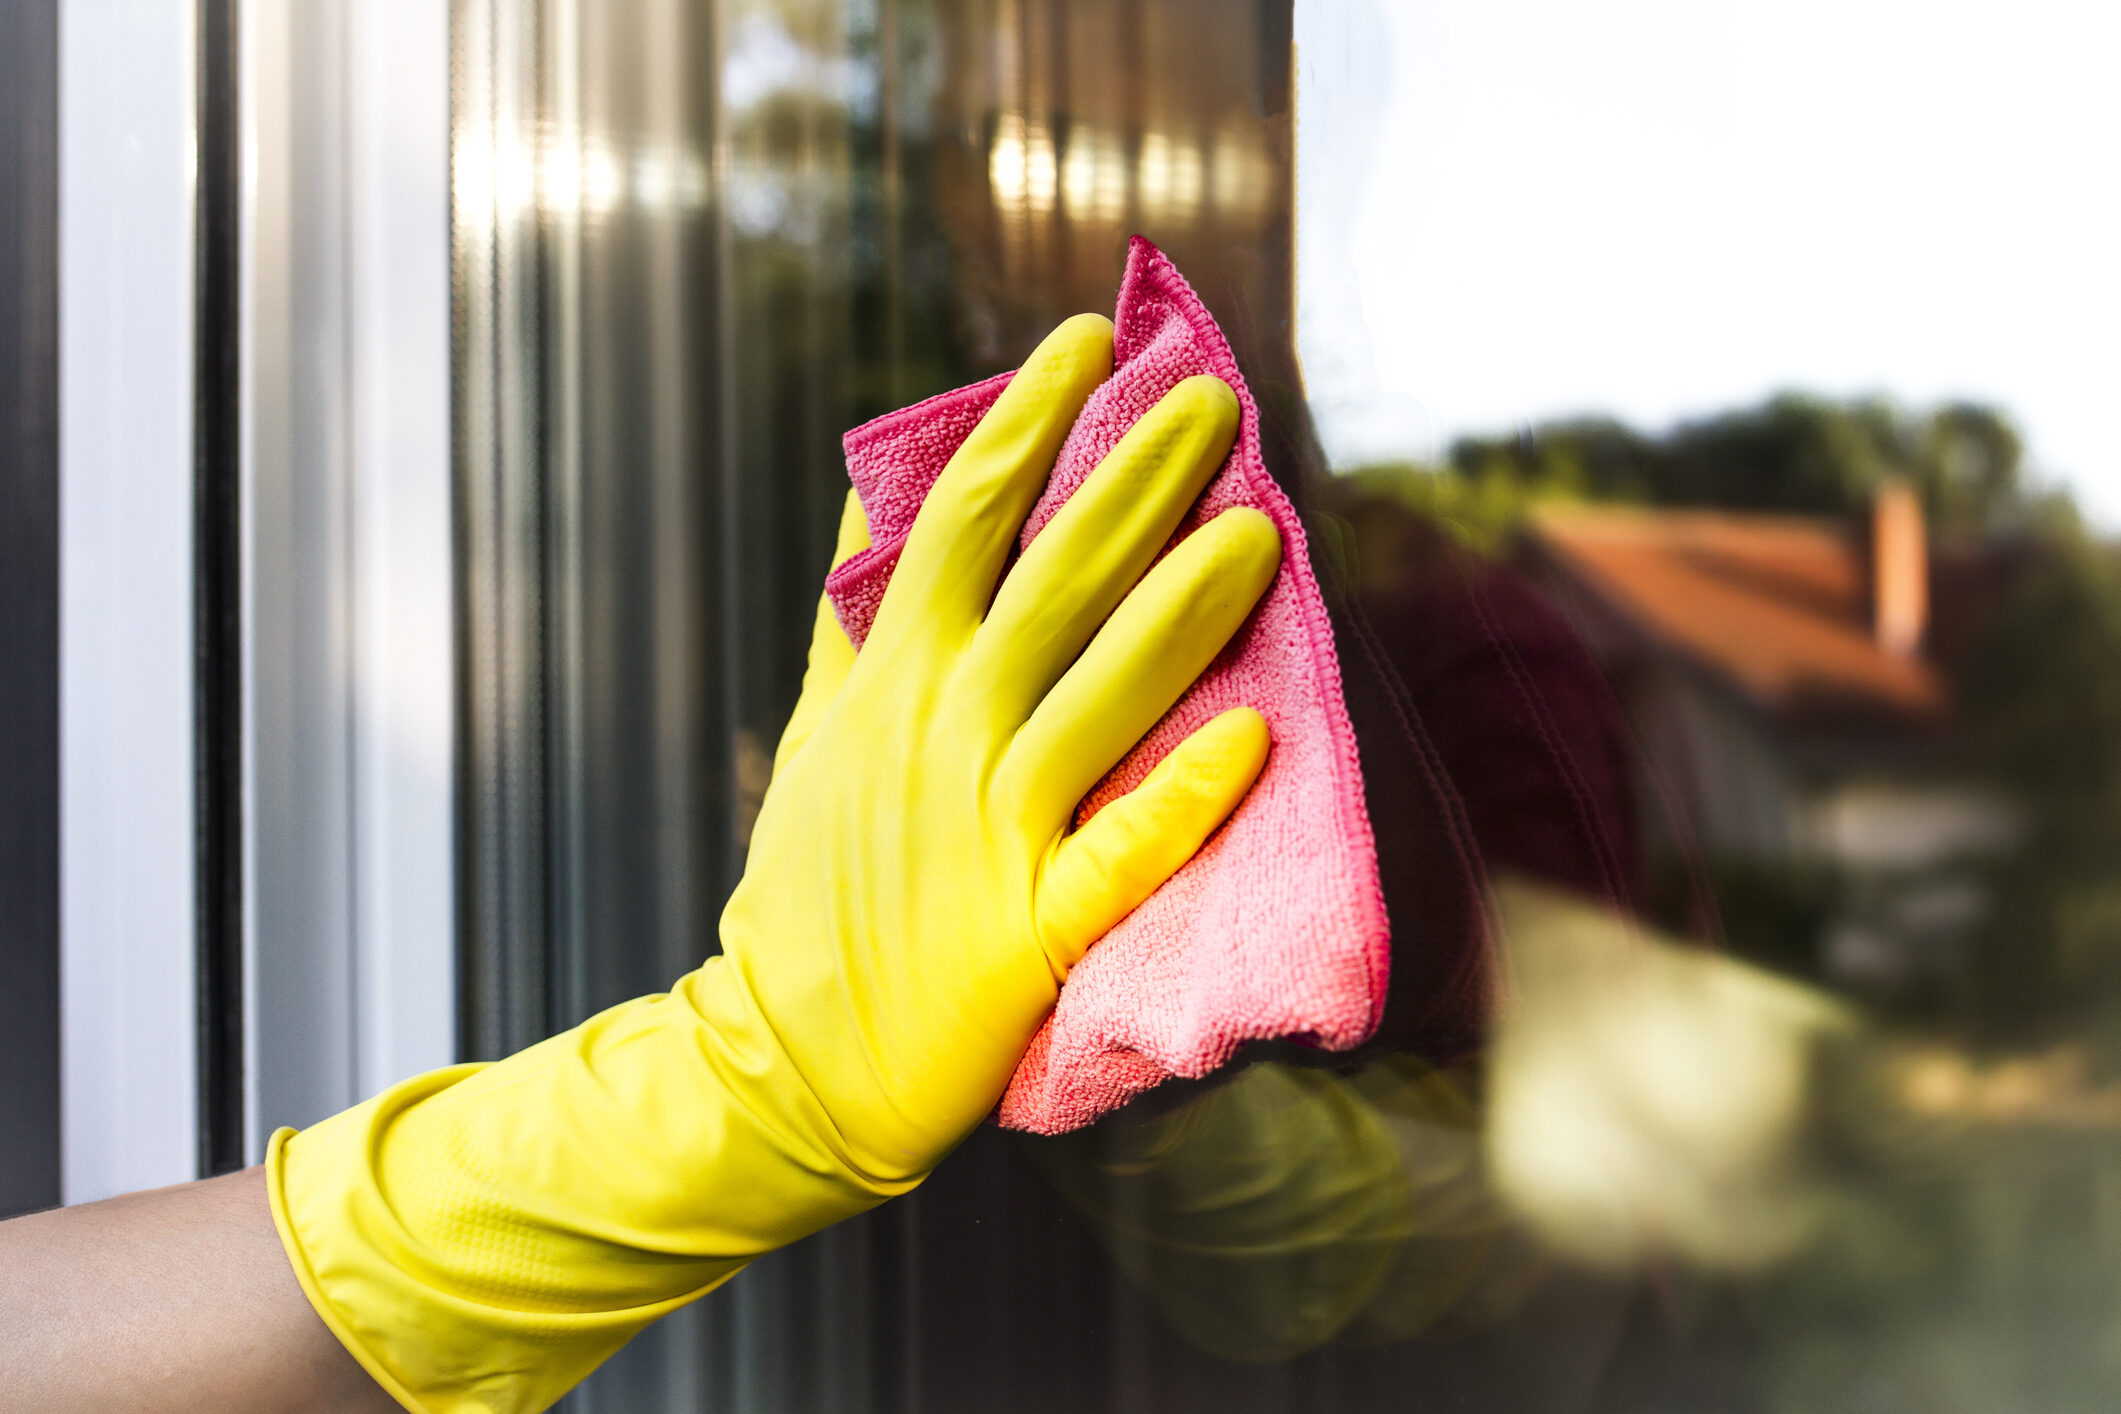 professional cleaning service wiping down a window